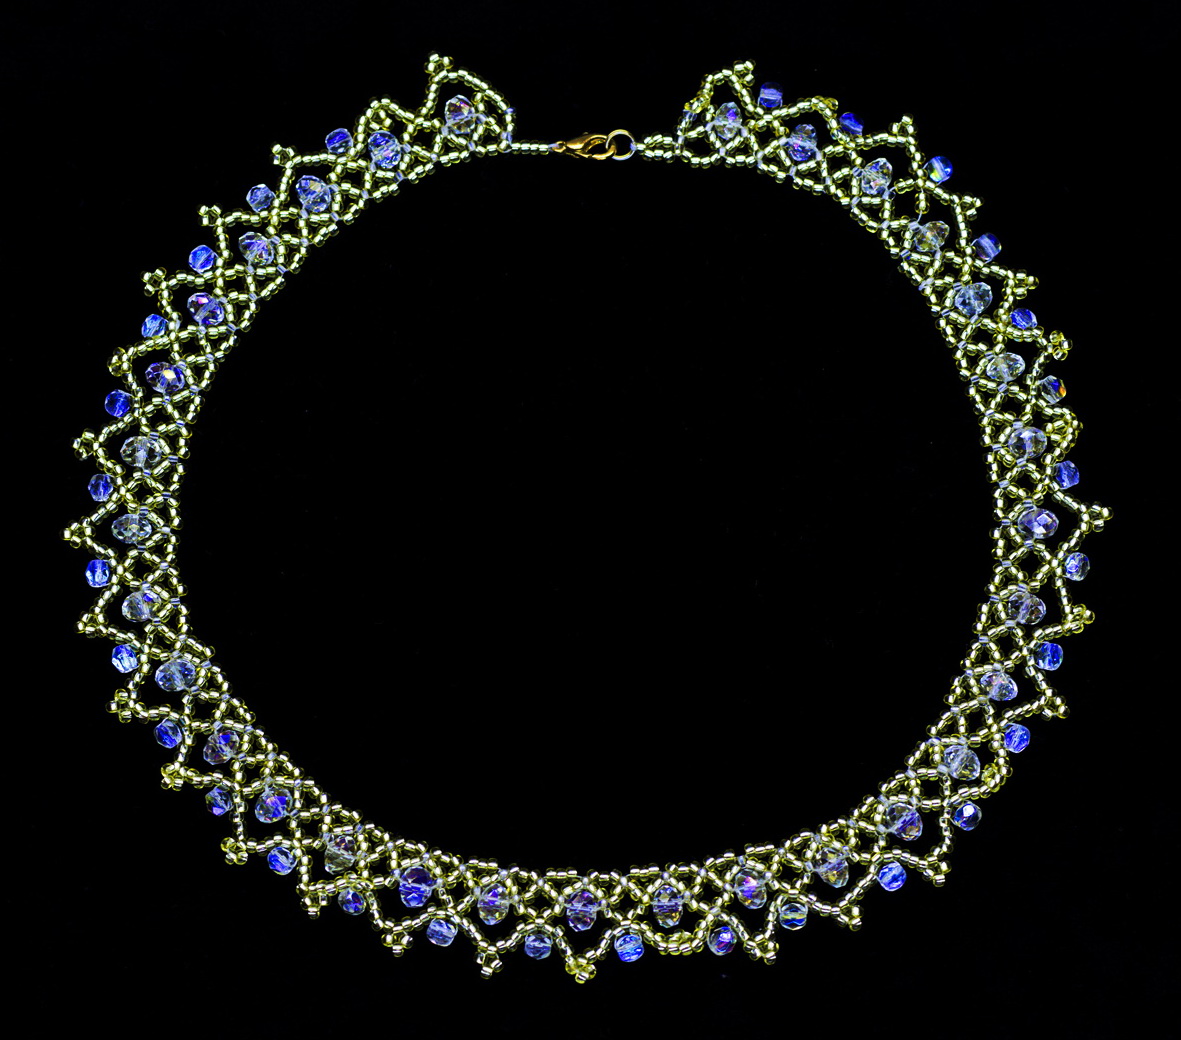 free-beading-pattern-necklace-tutorial-1